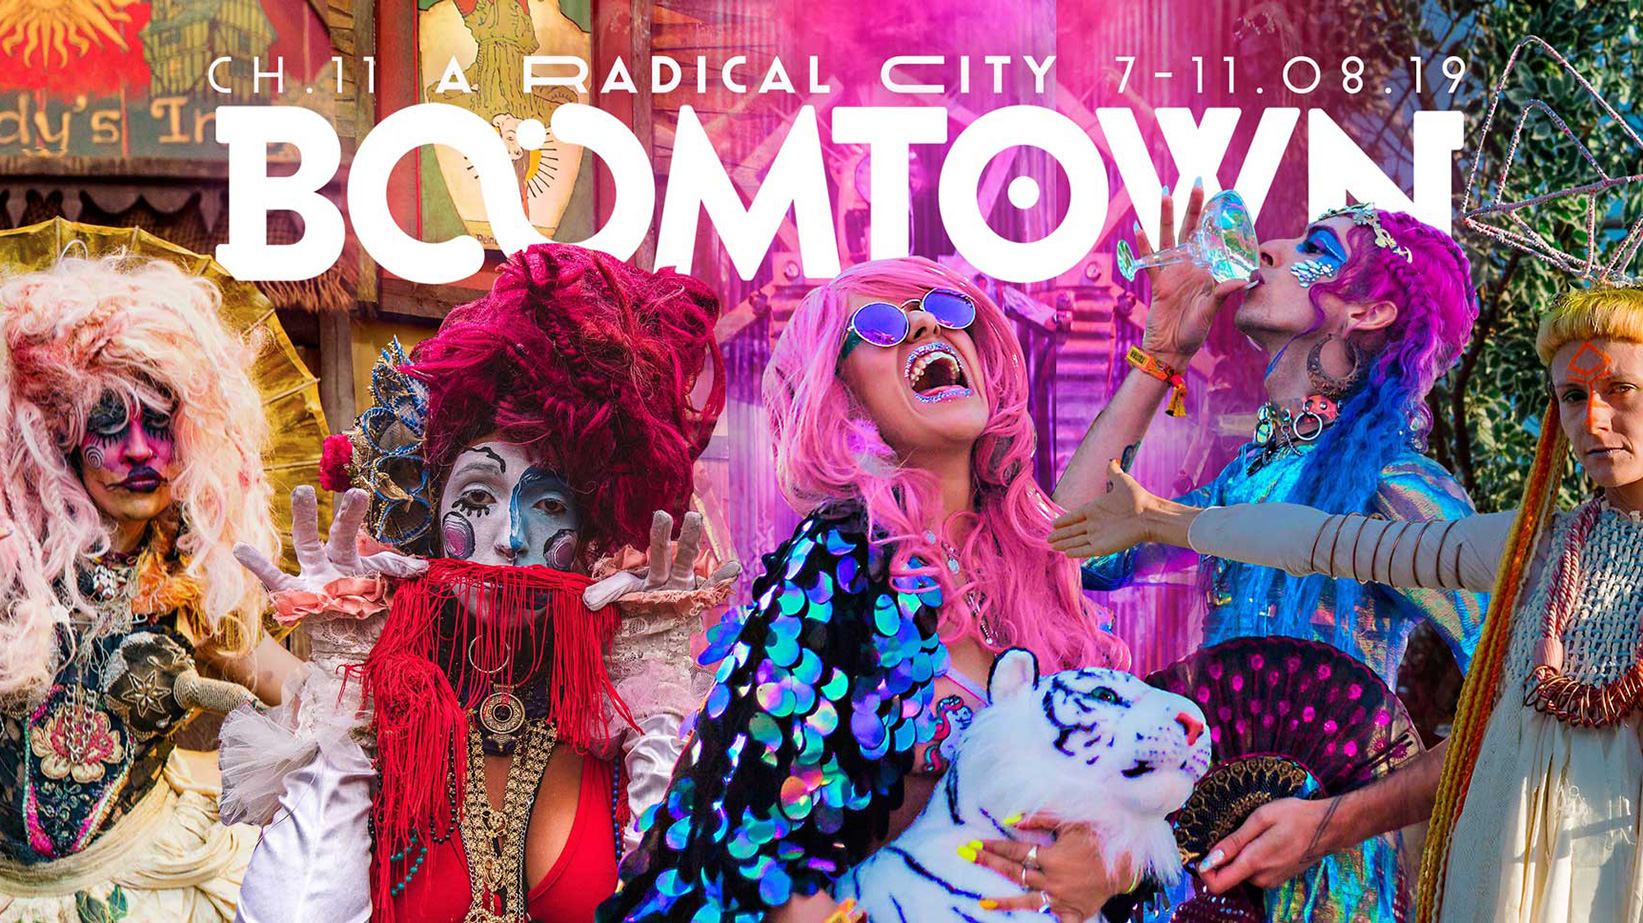 RouteNote heads to Boomtown festival Chapter 11: The Radical City